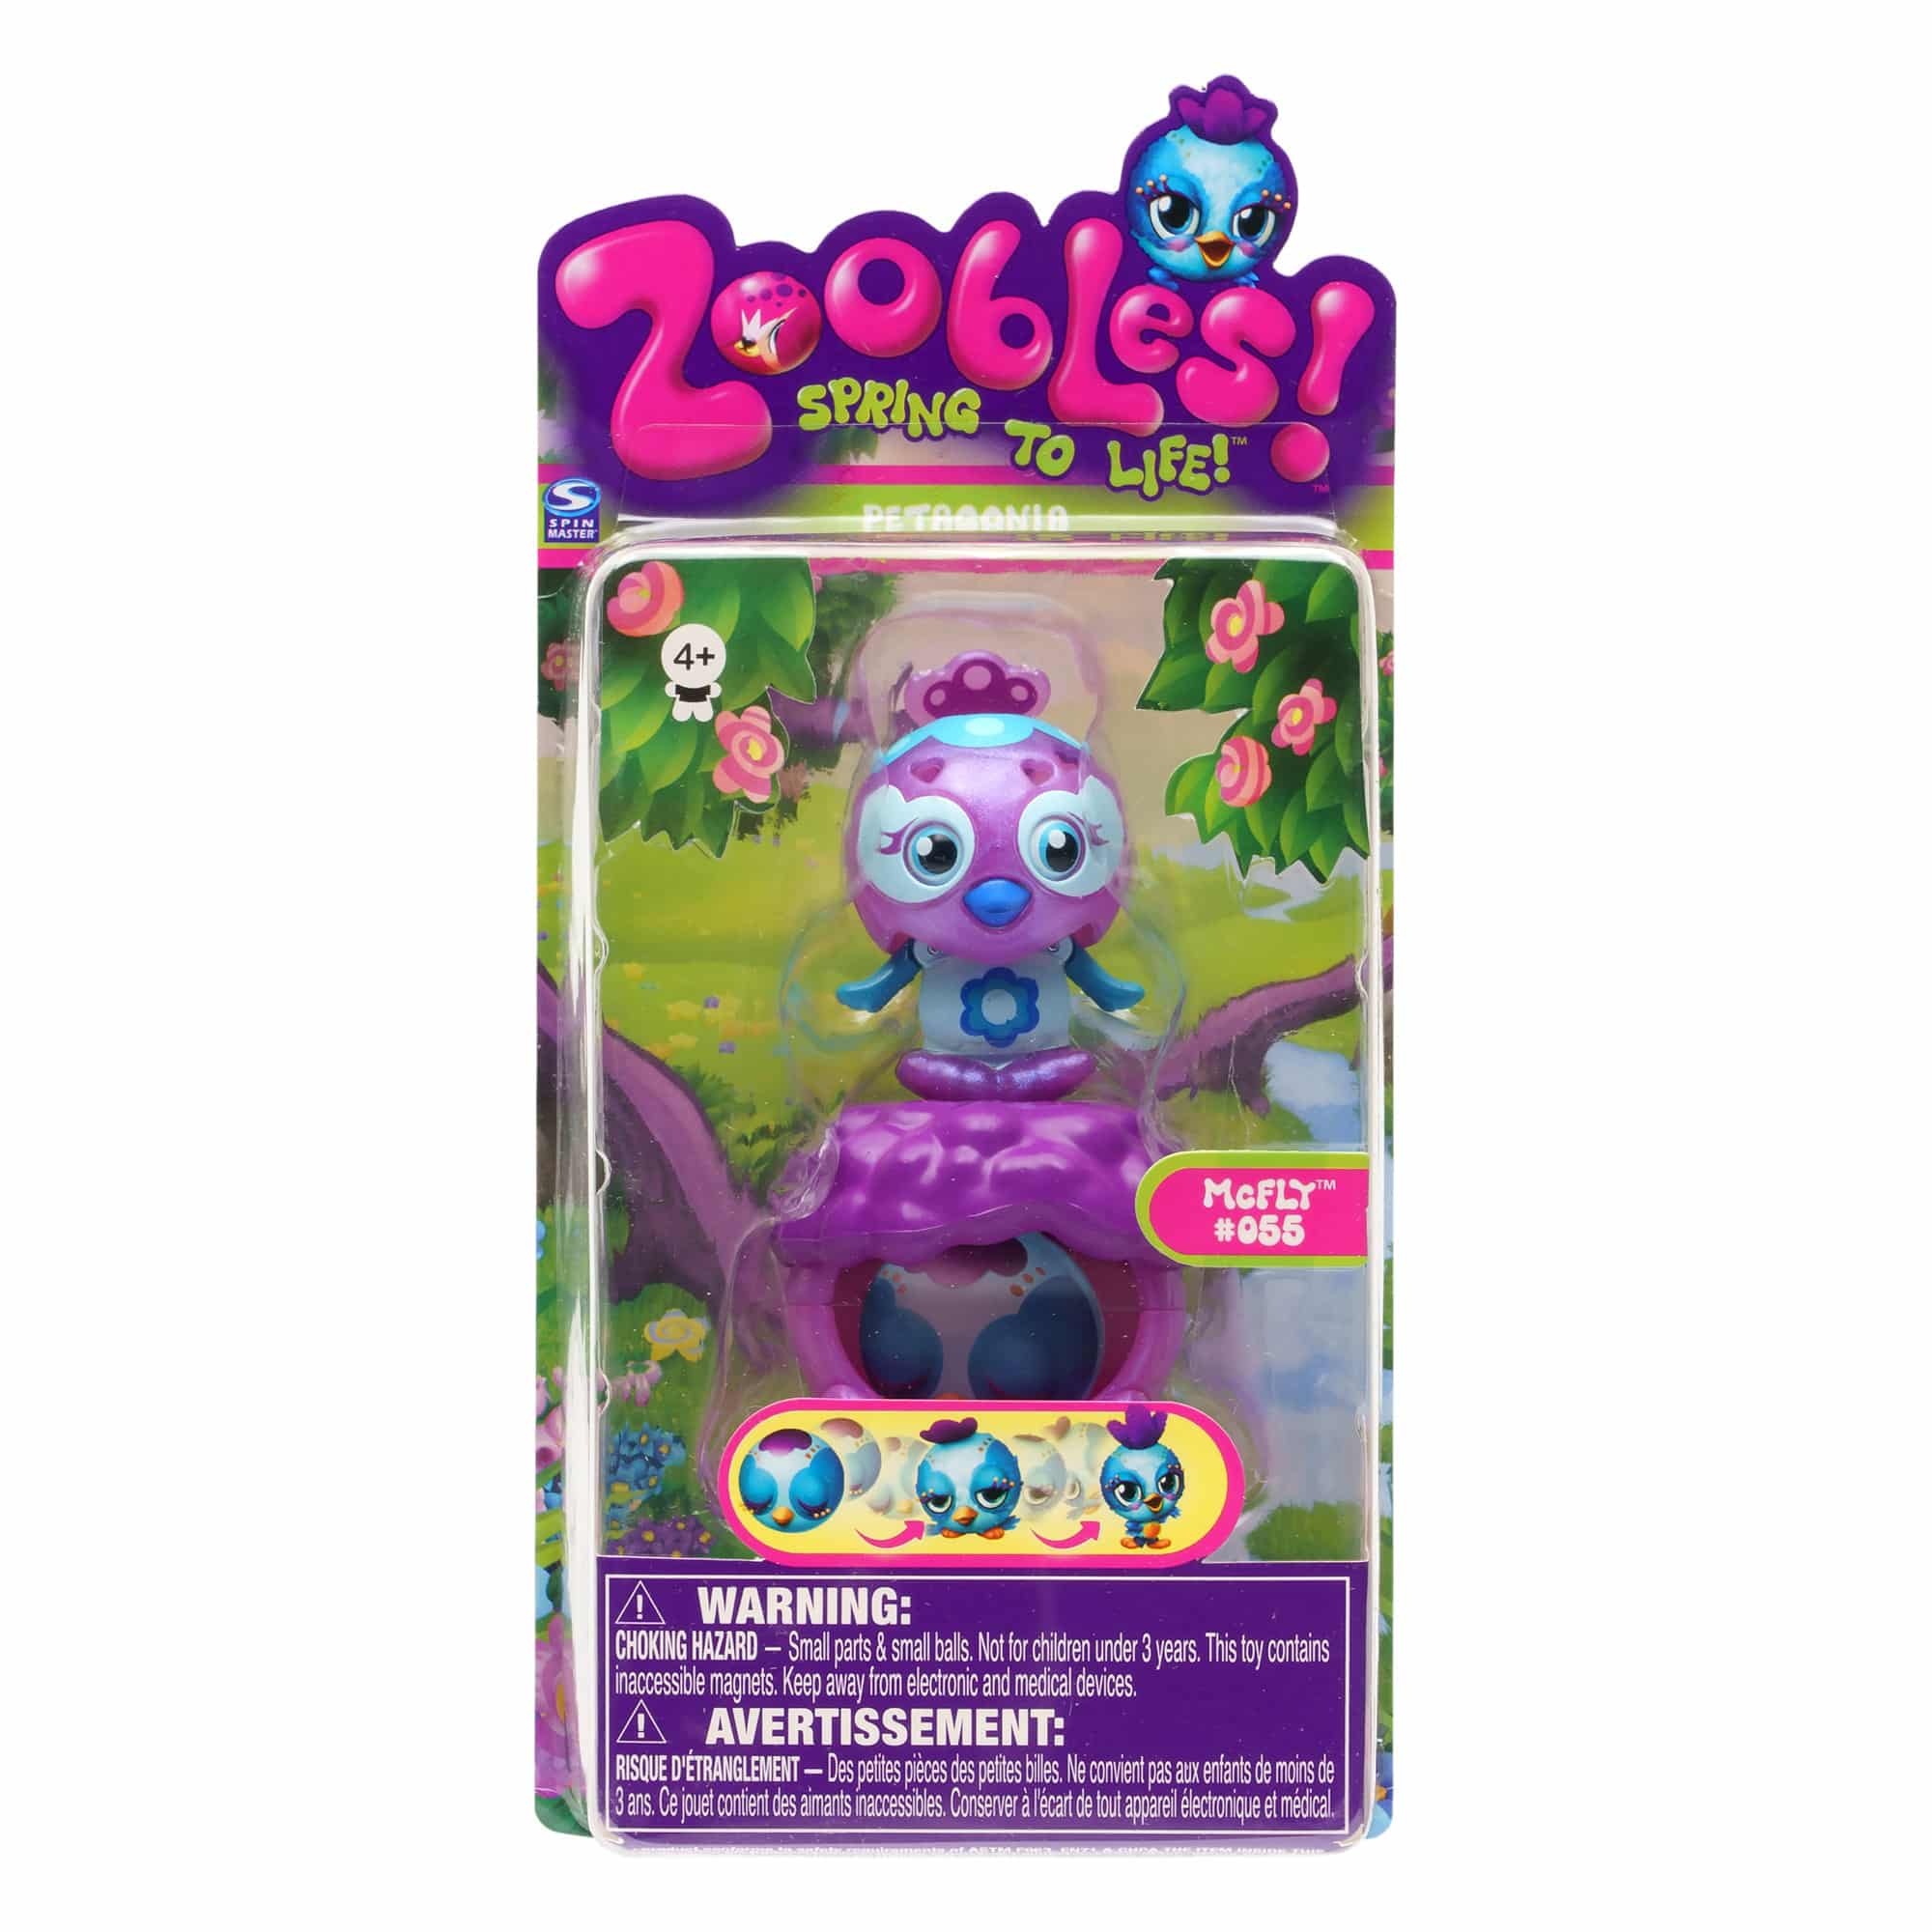 Zoobles - Petagonia Single Pack Figure - 055 McFly